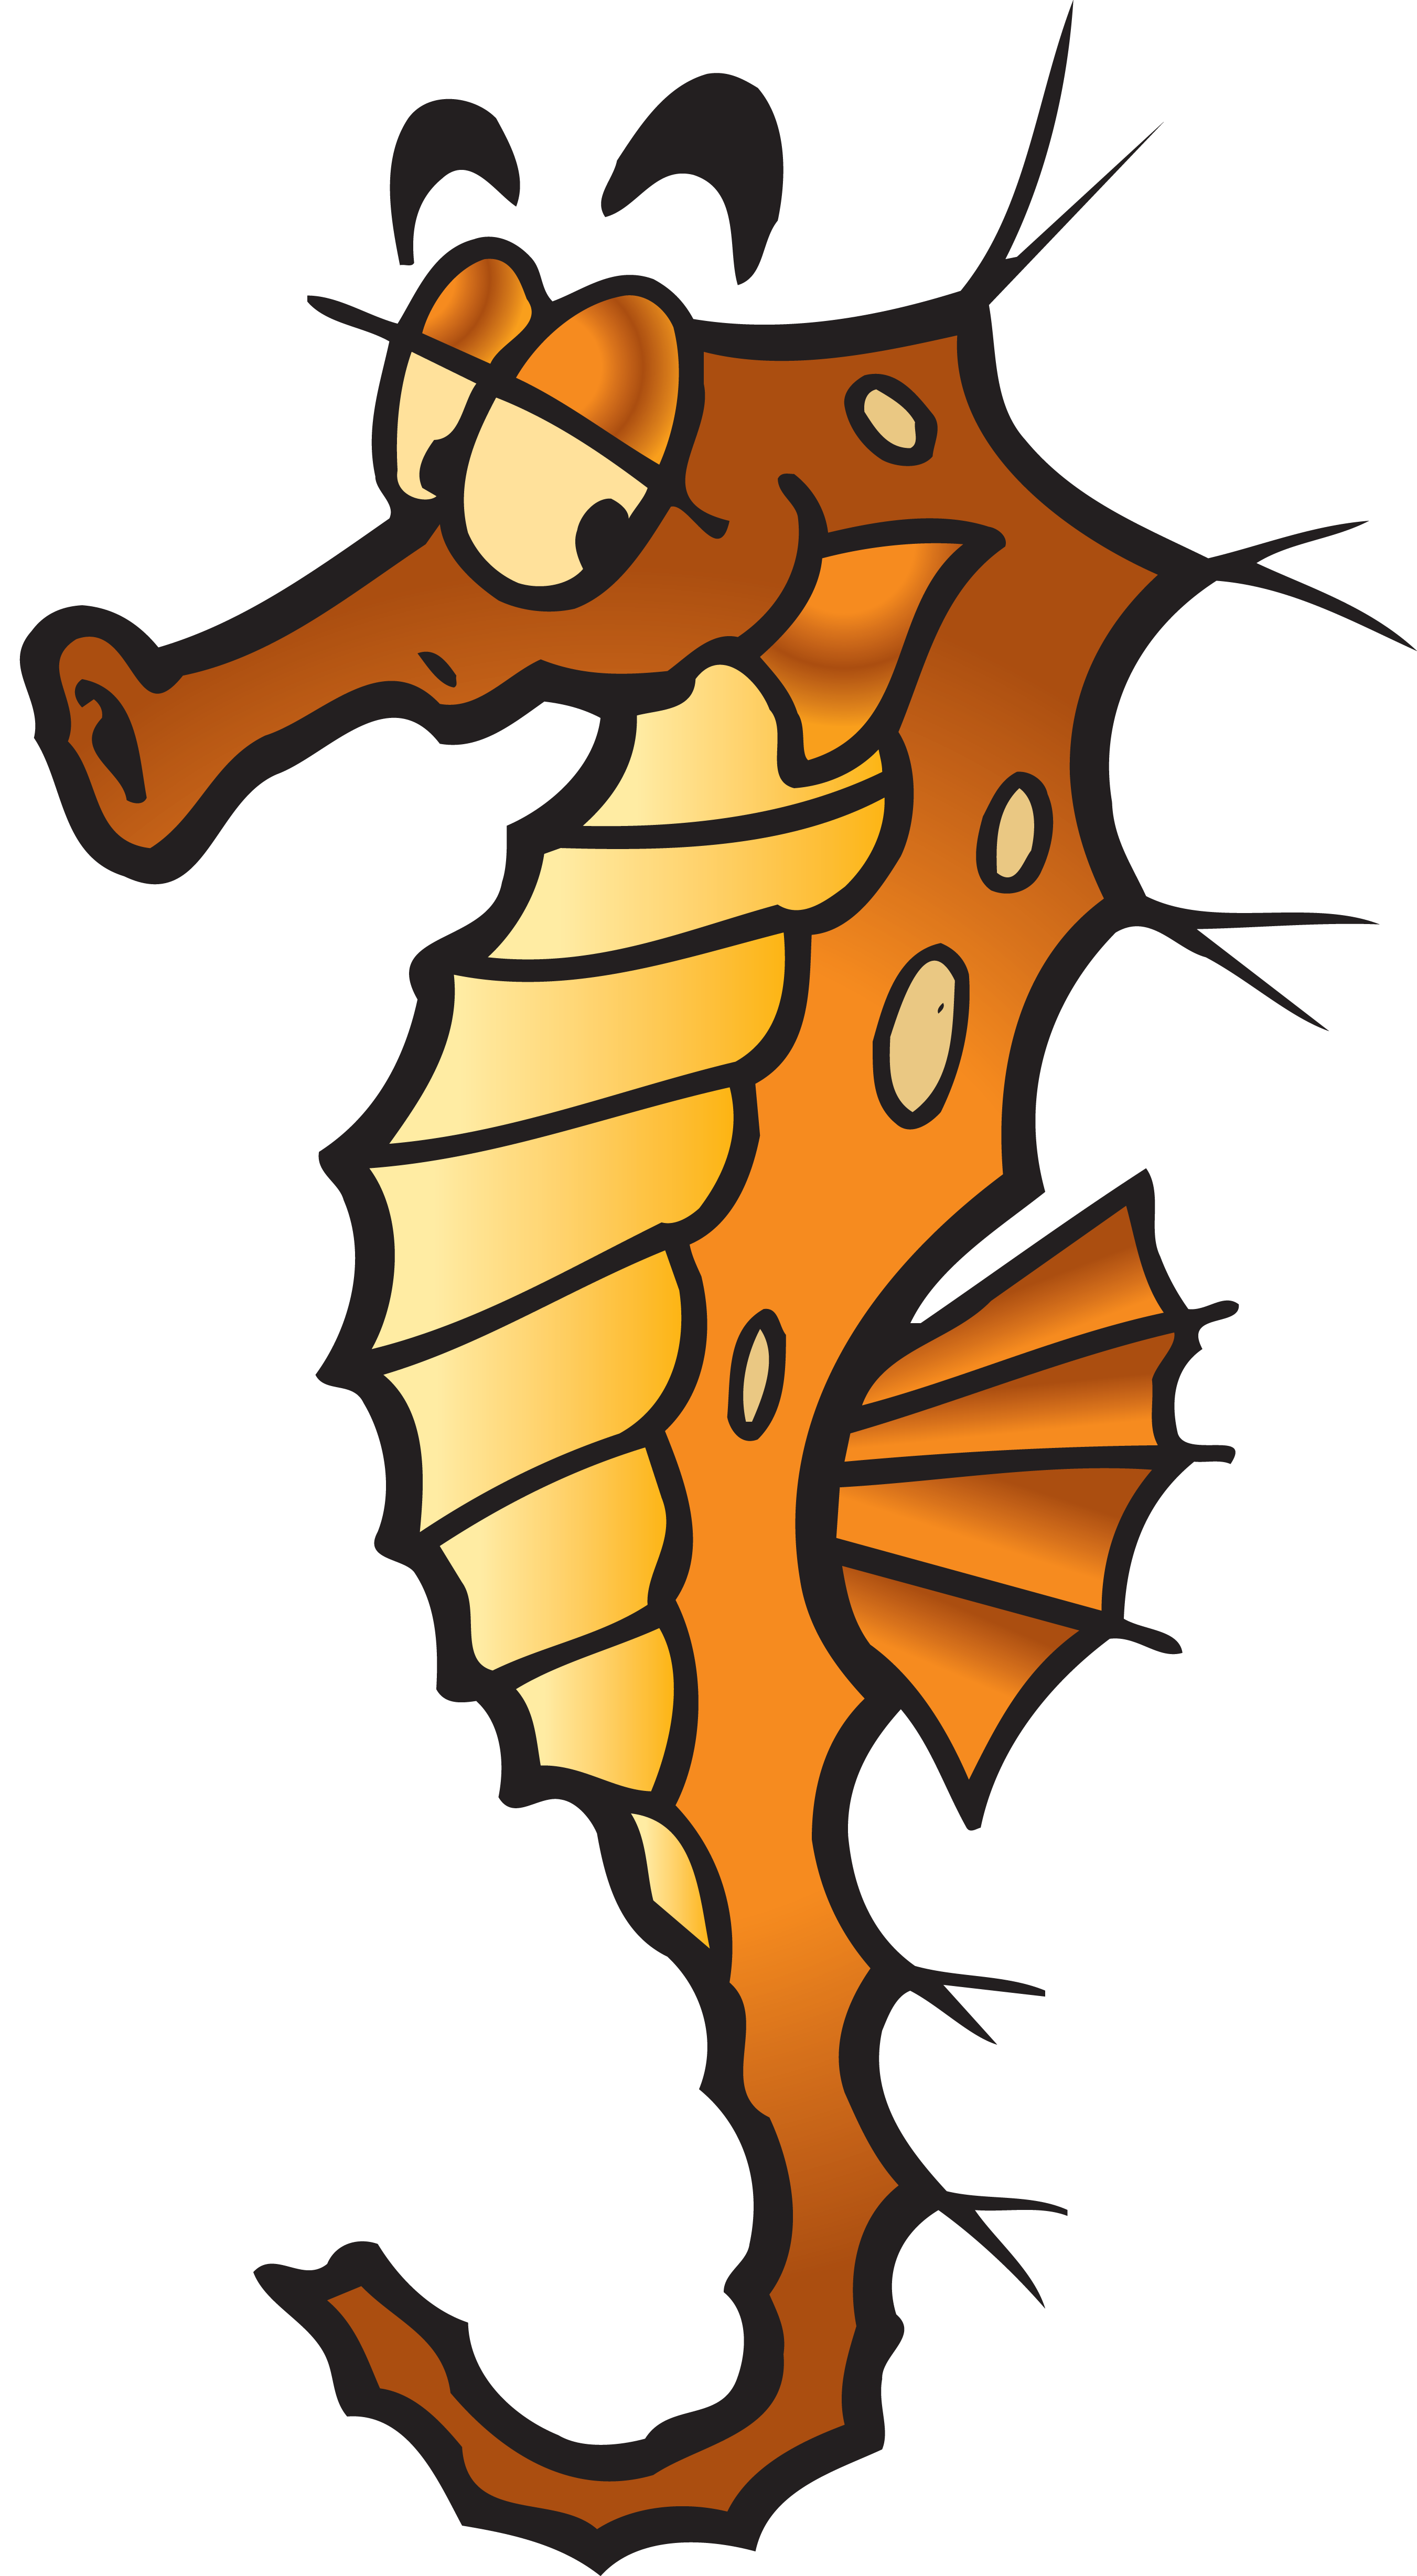 Seahorse PNG images Download